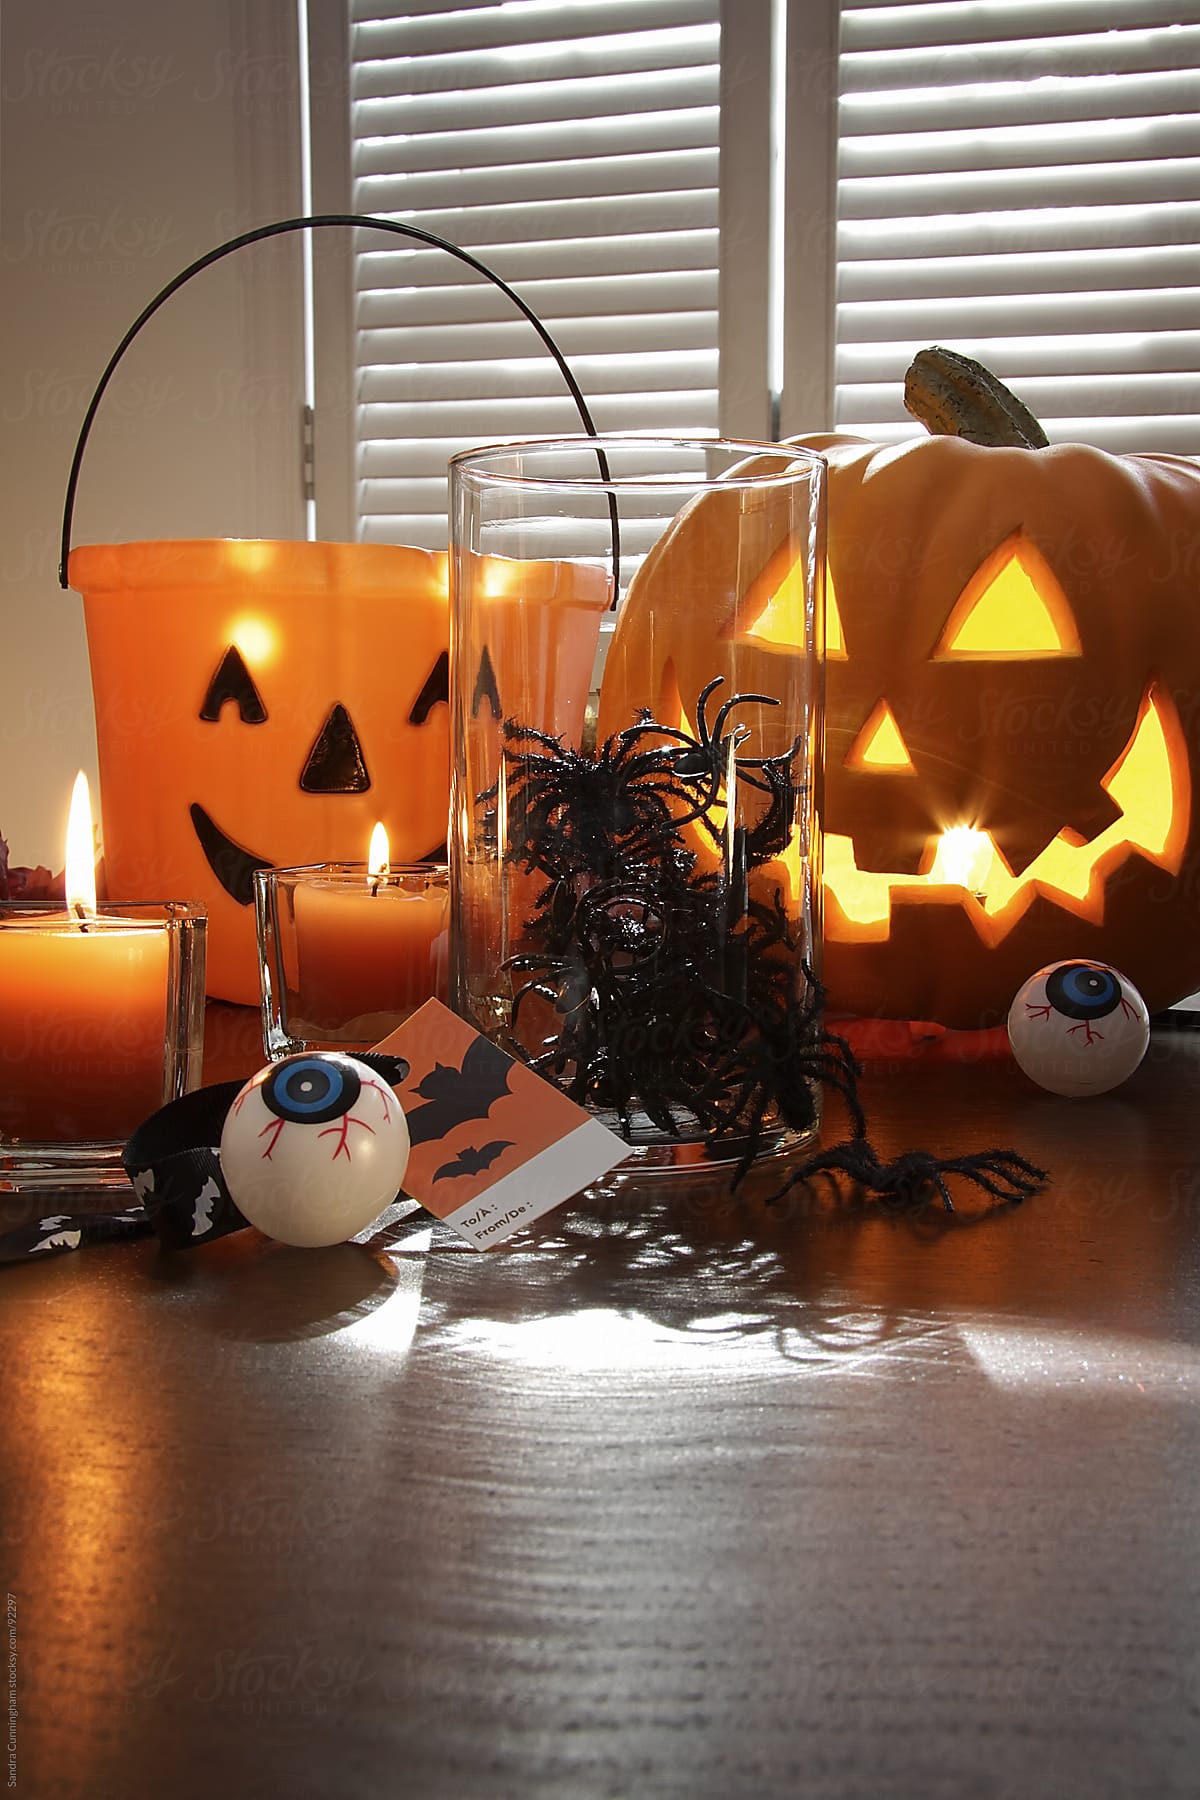 Pumpkin, candles and spiders in a jar for Halloween